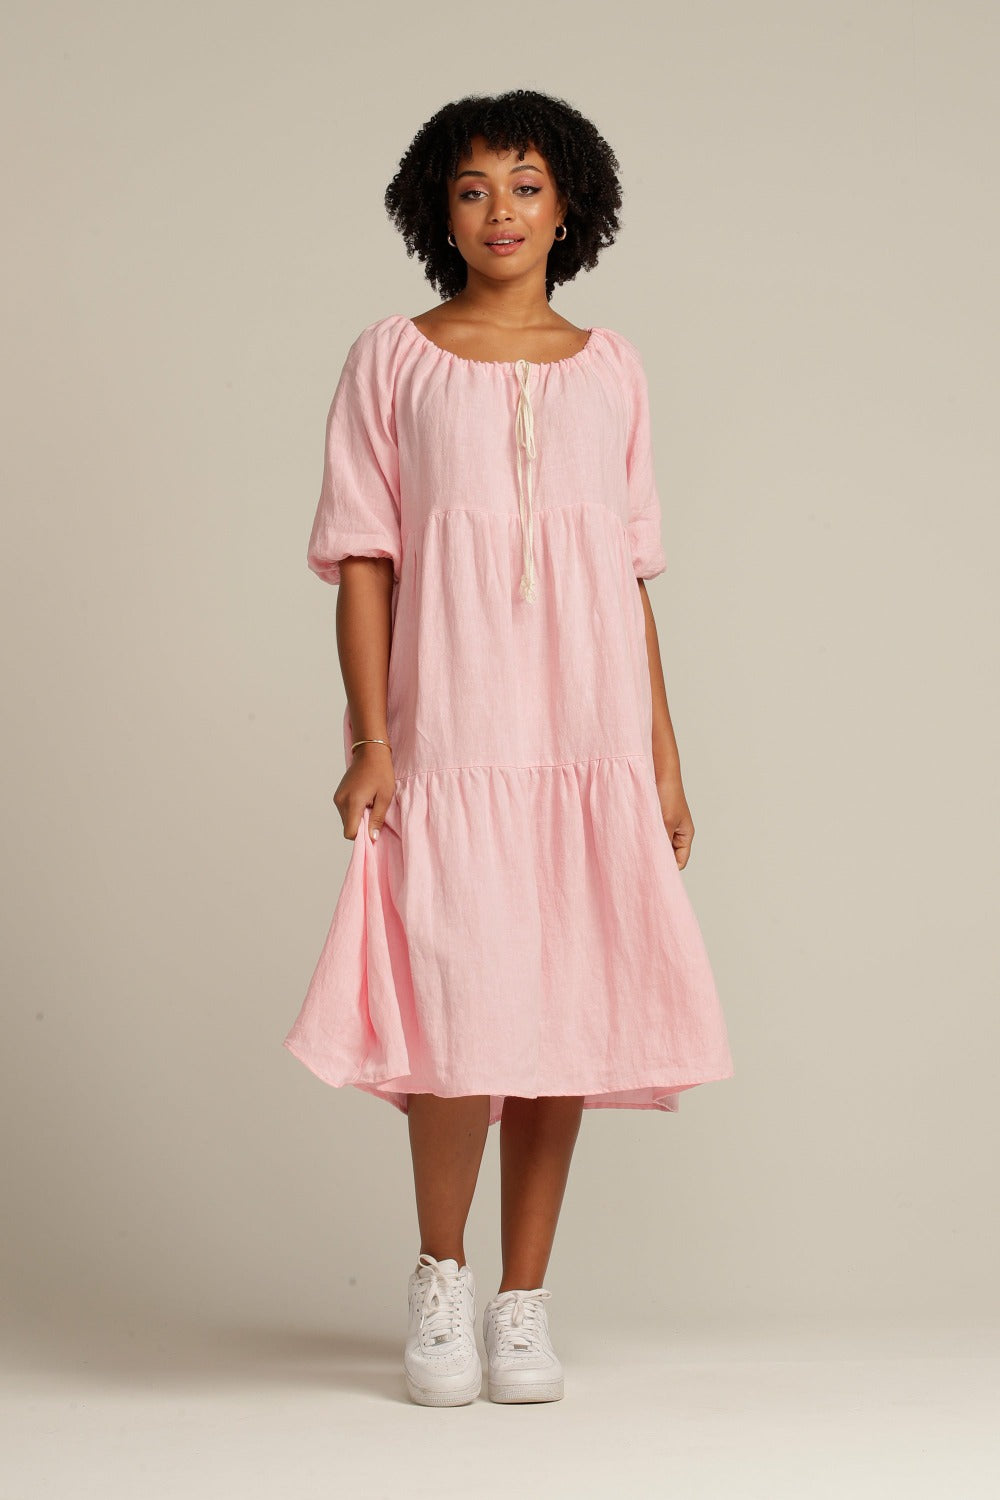 brown woman wears a light pink linen dress with white shoes